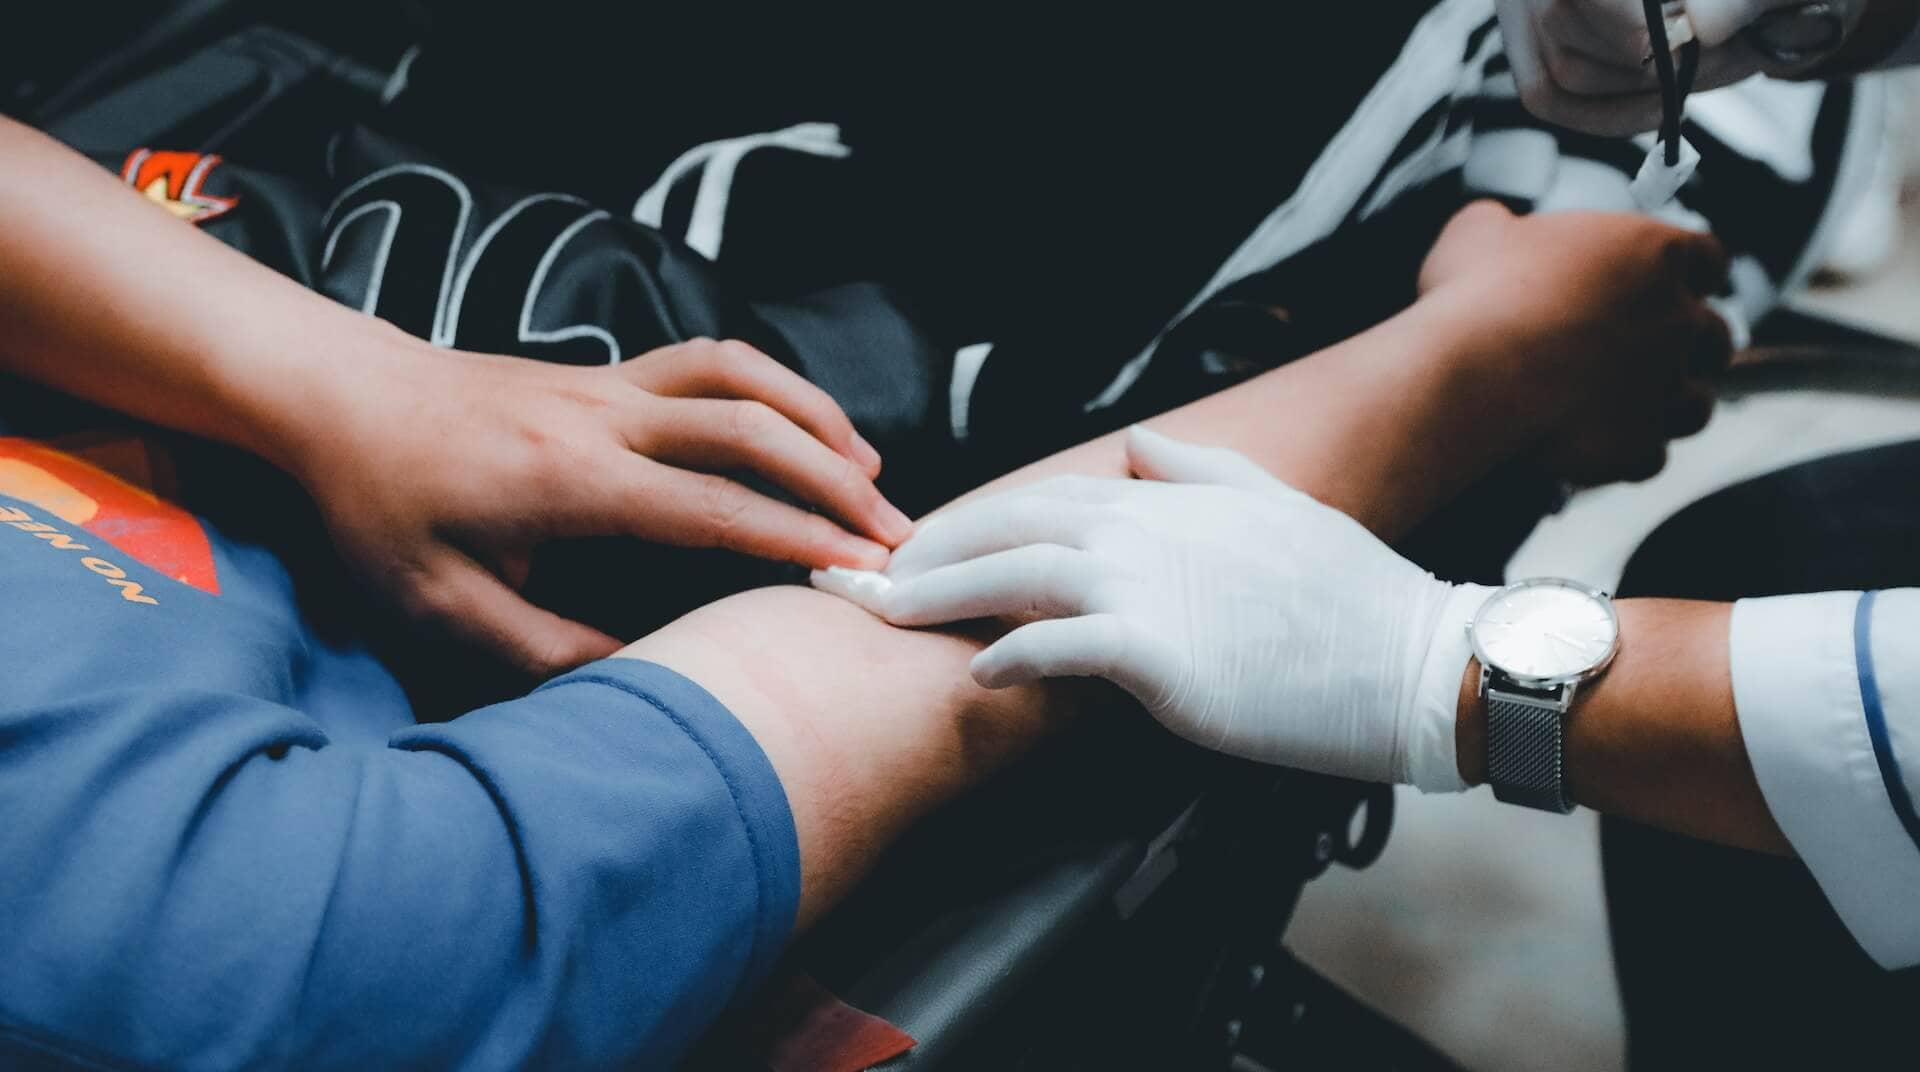 A healthcare professional pressing on a person's arm after having taken blood from them for a test